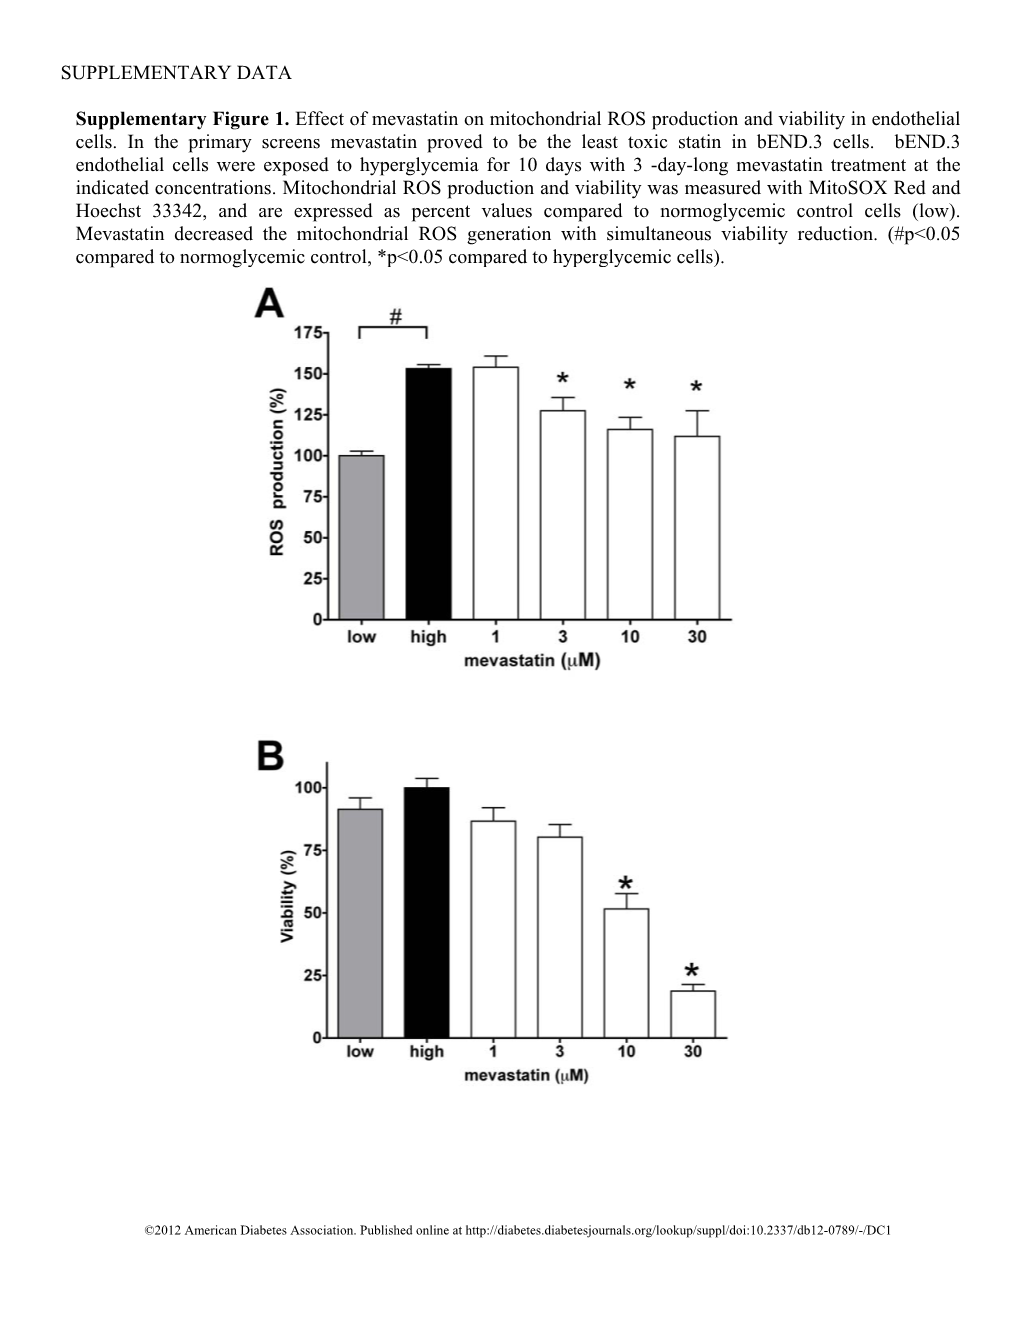 SUPPLEMENTARY DATA Supplementary Figure 1. Effect of Mevastatin on Mitochondrial ROS Production and Viability in Endothelial